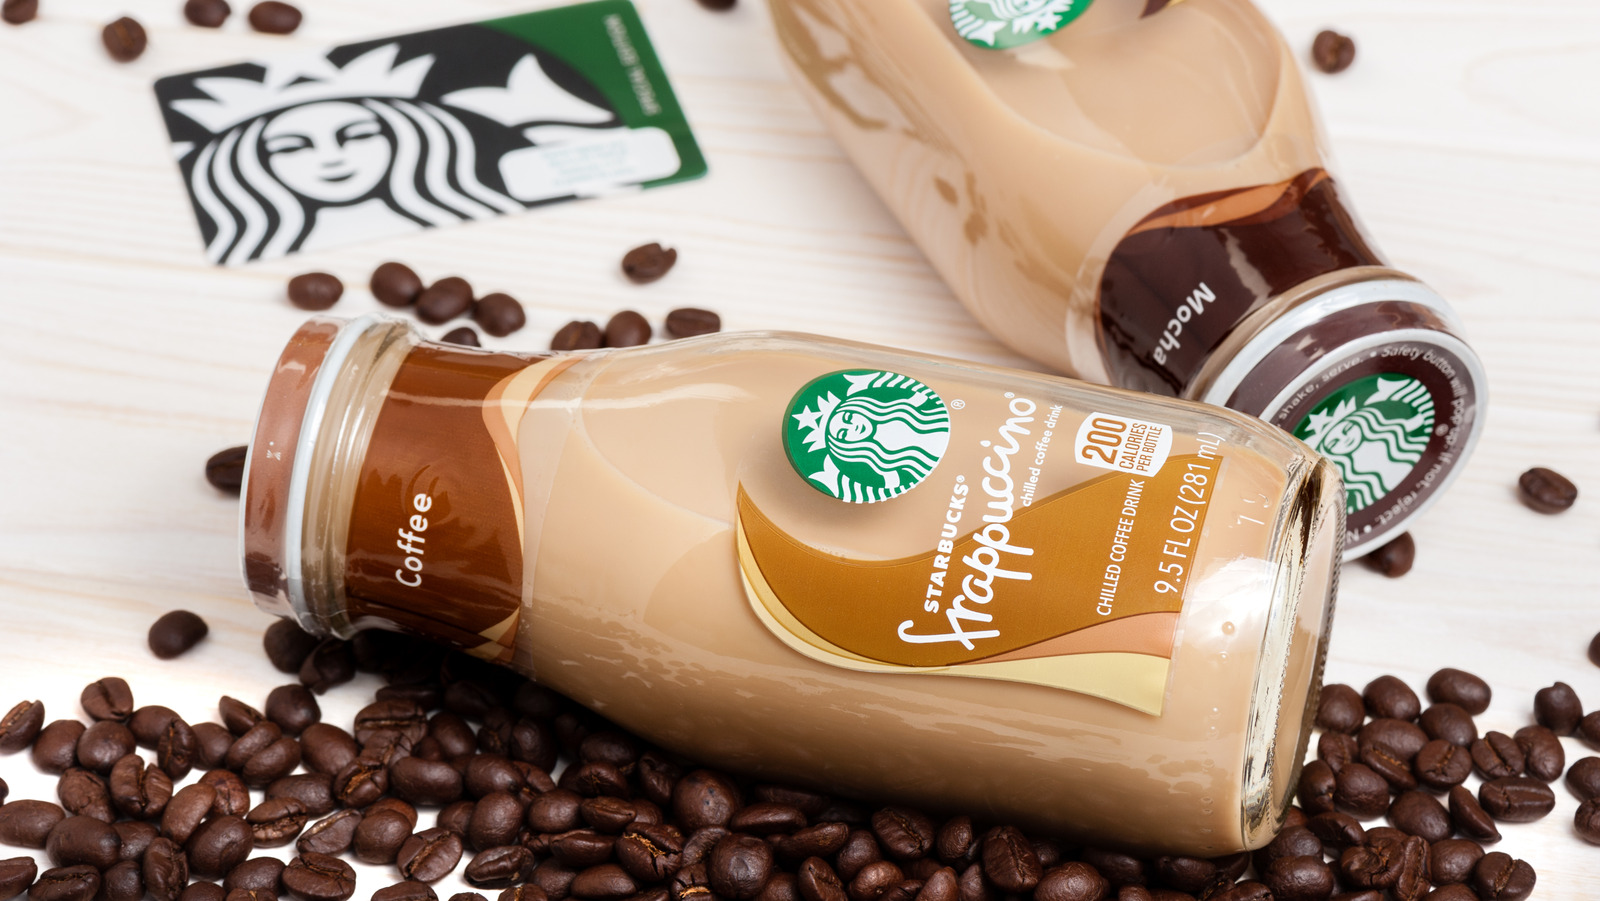 https://www.tastingtable.com/img/gallery/freeze-starbucks-frappuccino-bottles-to-enjoy-them-the-right-way/l-intro-1692655098.jpg